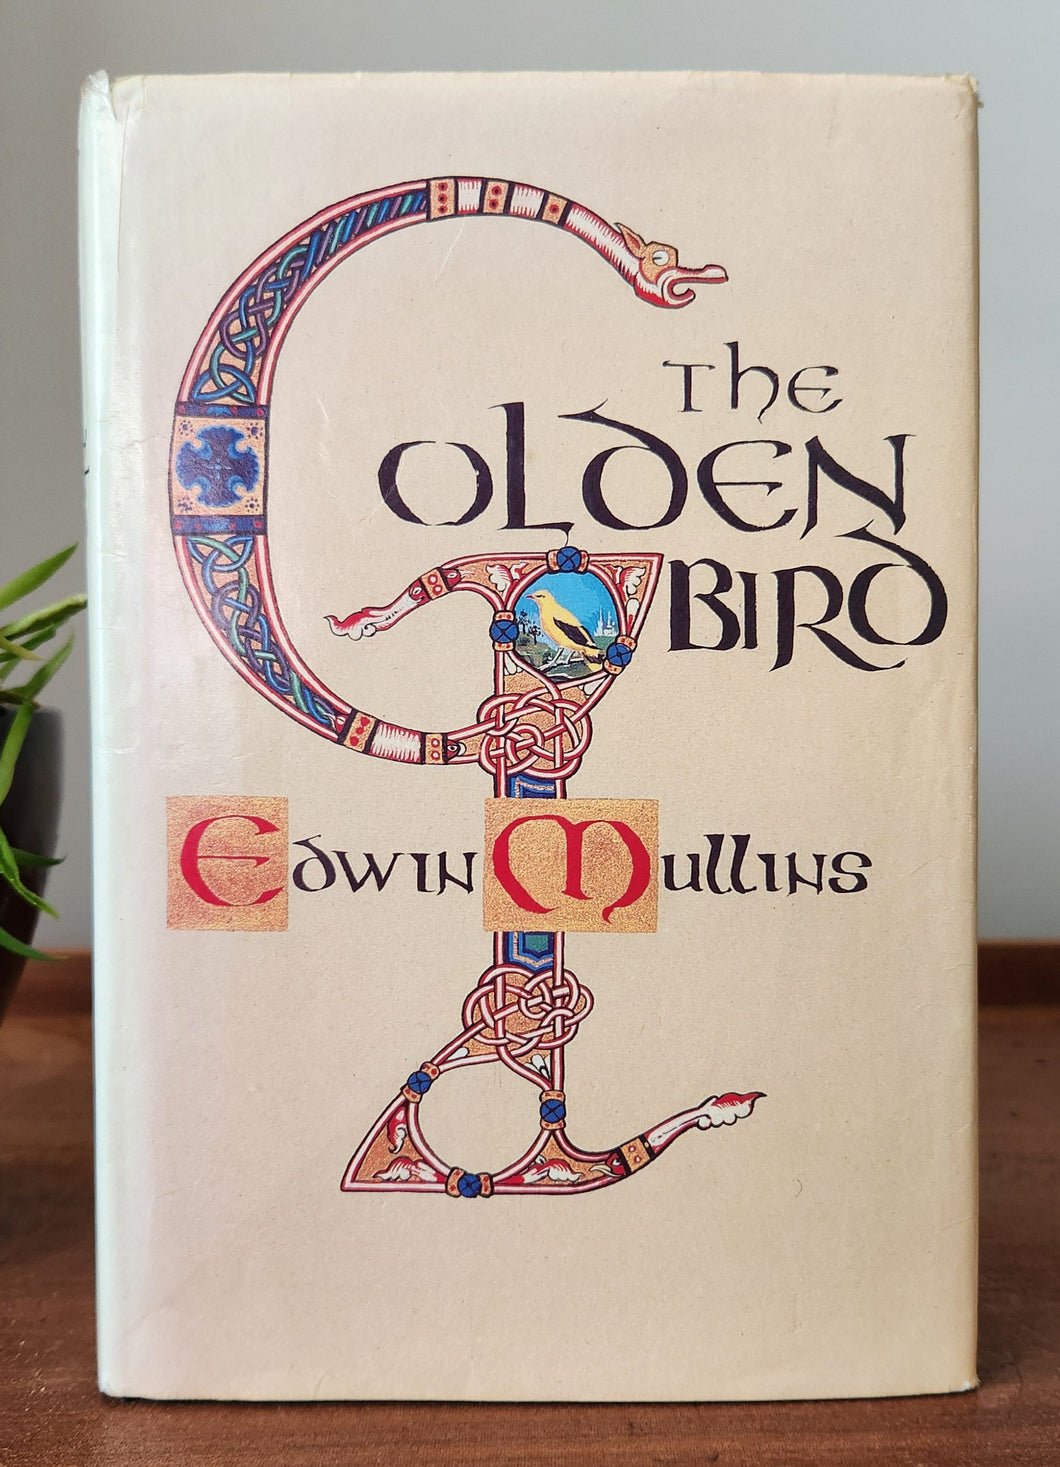 The Golden Bird by Edwin Mullins (First Edition)